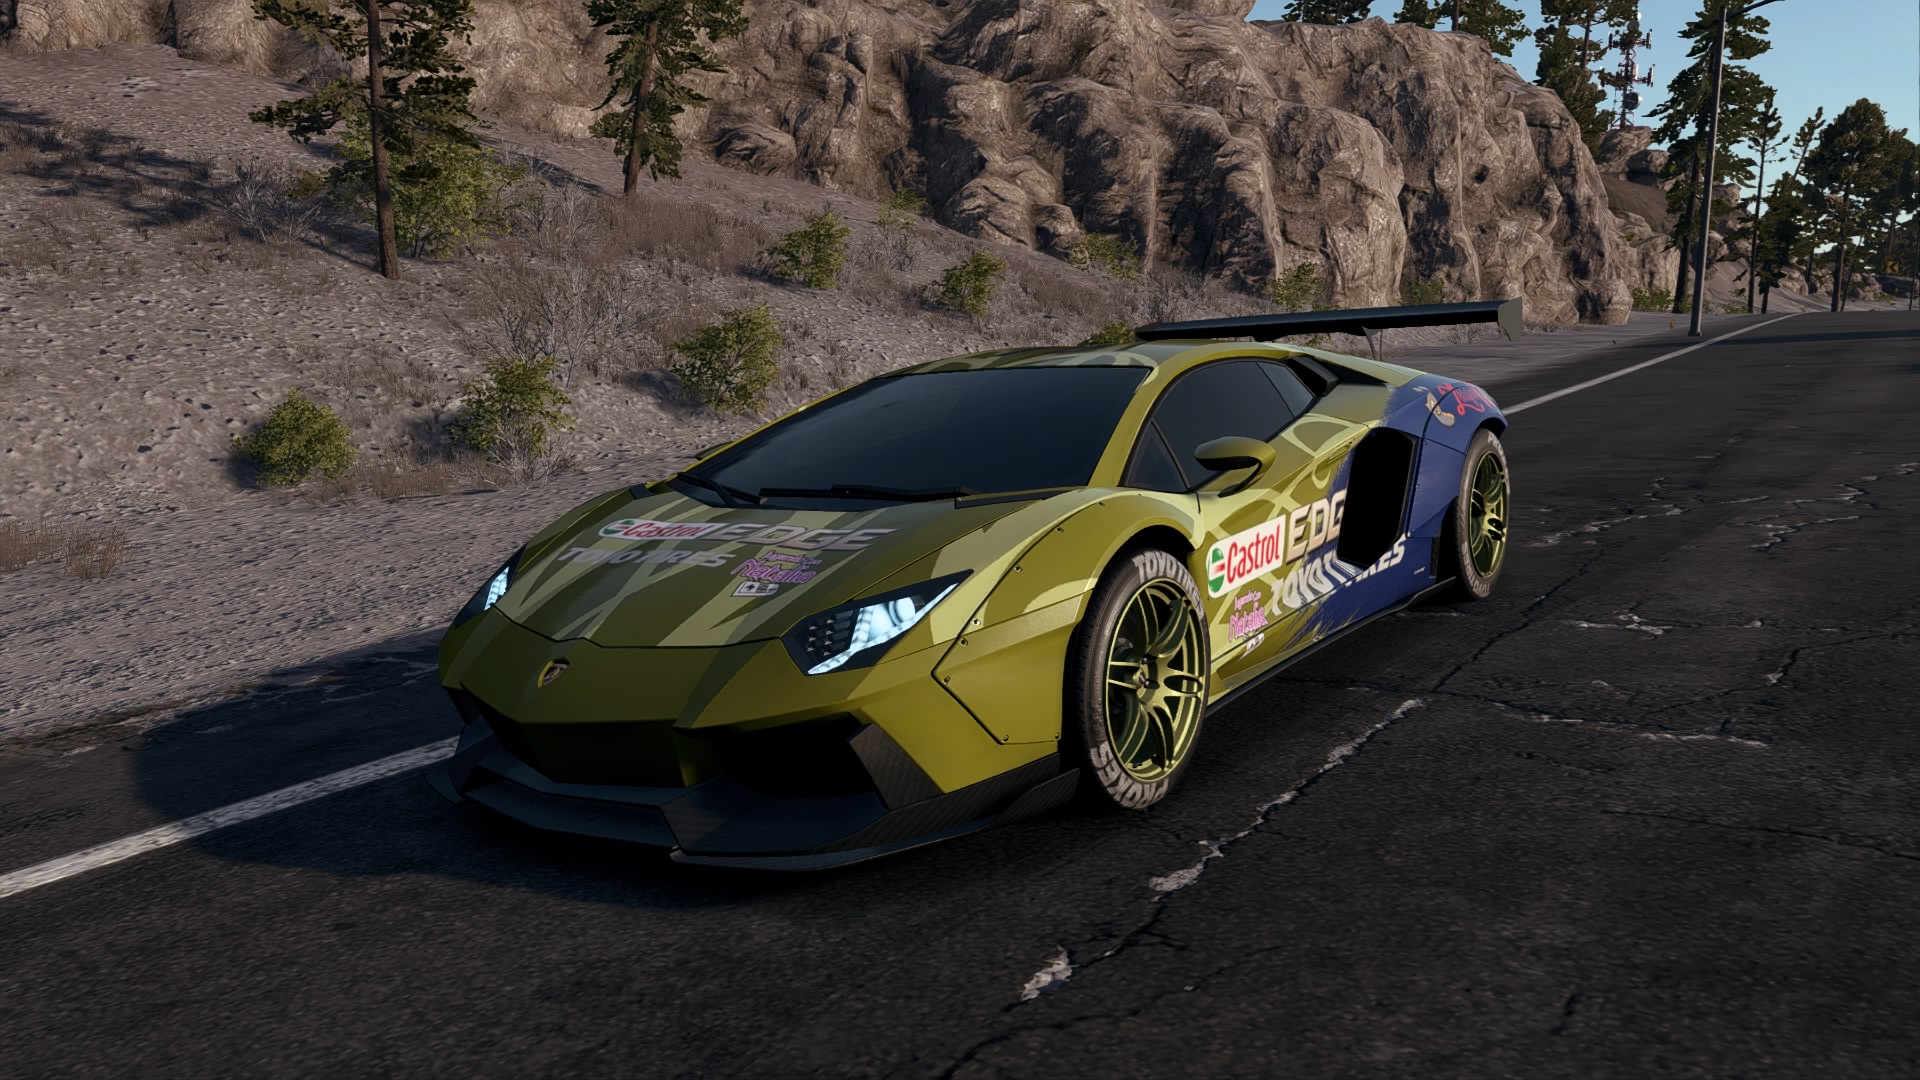 Car Need For Speed Payback Lamborghini Aventador LP700 4 Yellow Castrol Livery 1920x1080